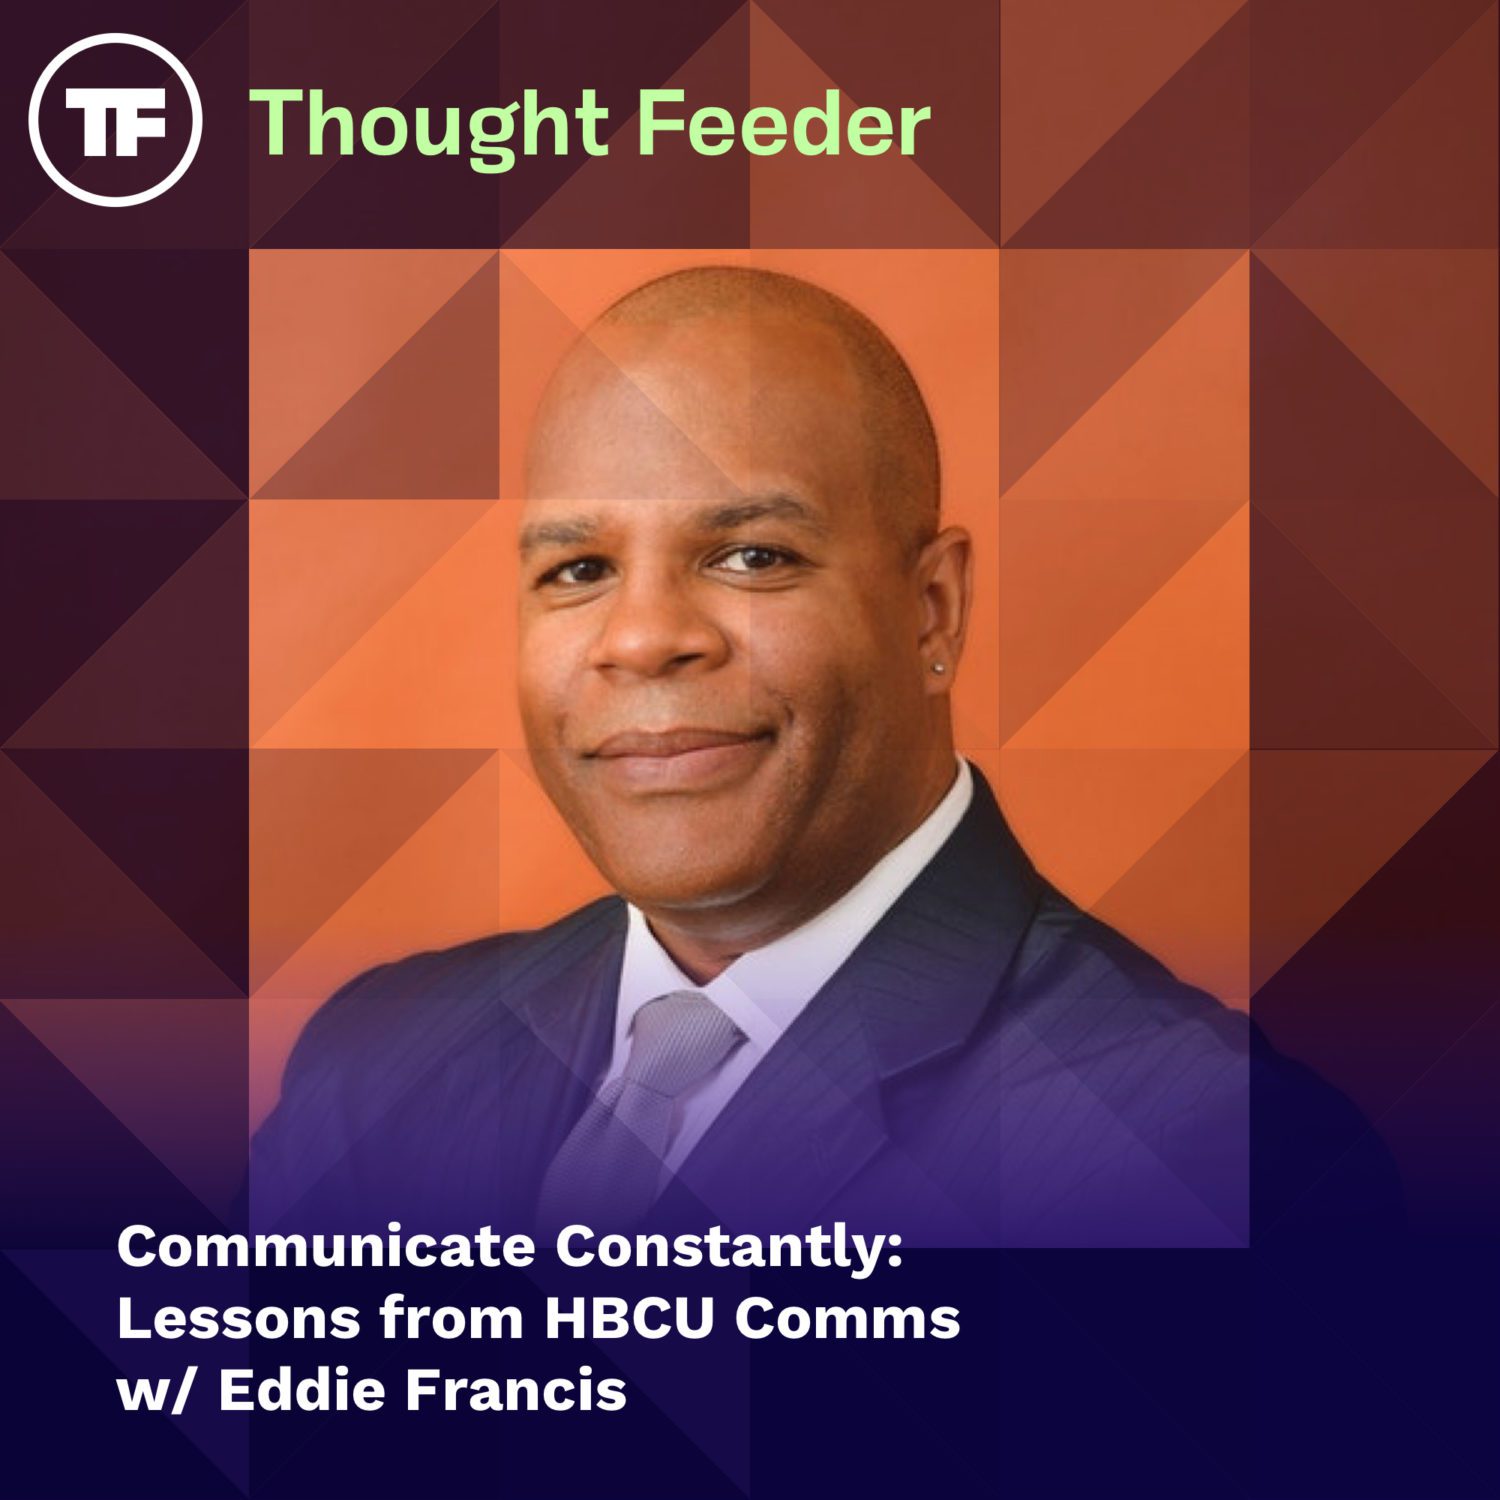 Communicate Constantly: Lessons from HBCU Comms with Eddie Francis